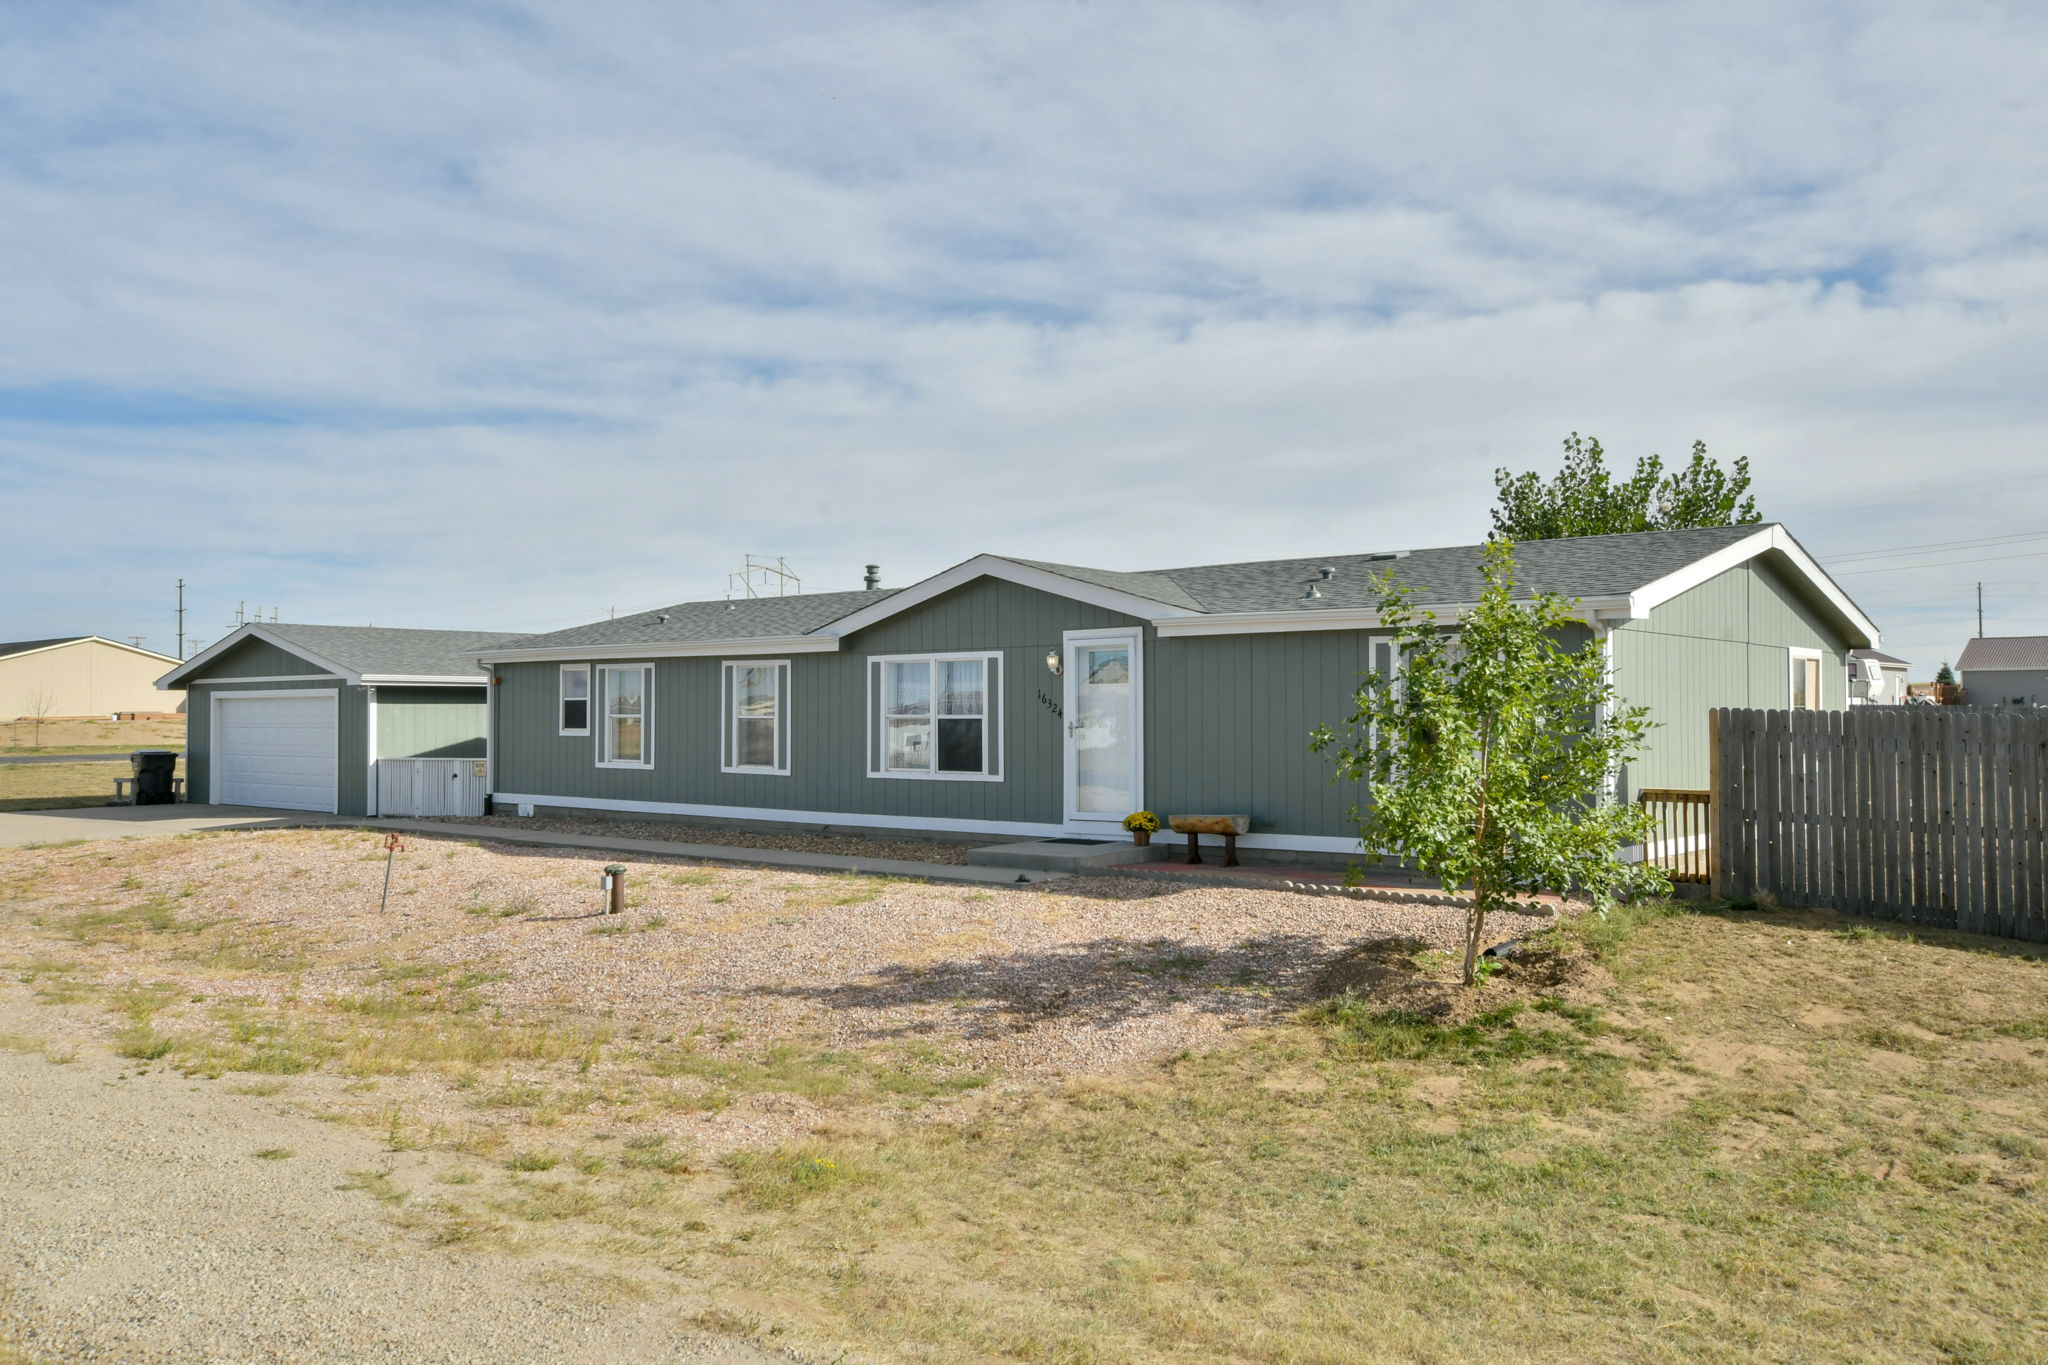  16324 Good Ave., Fort Lupton, CO 80621, US